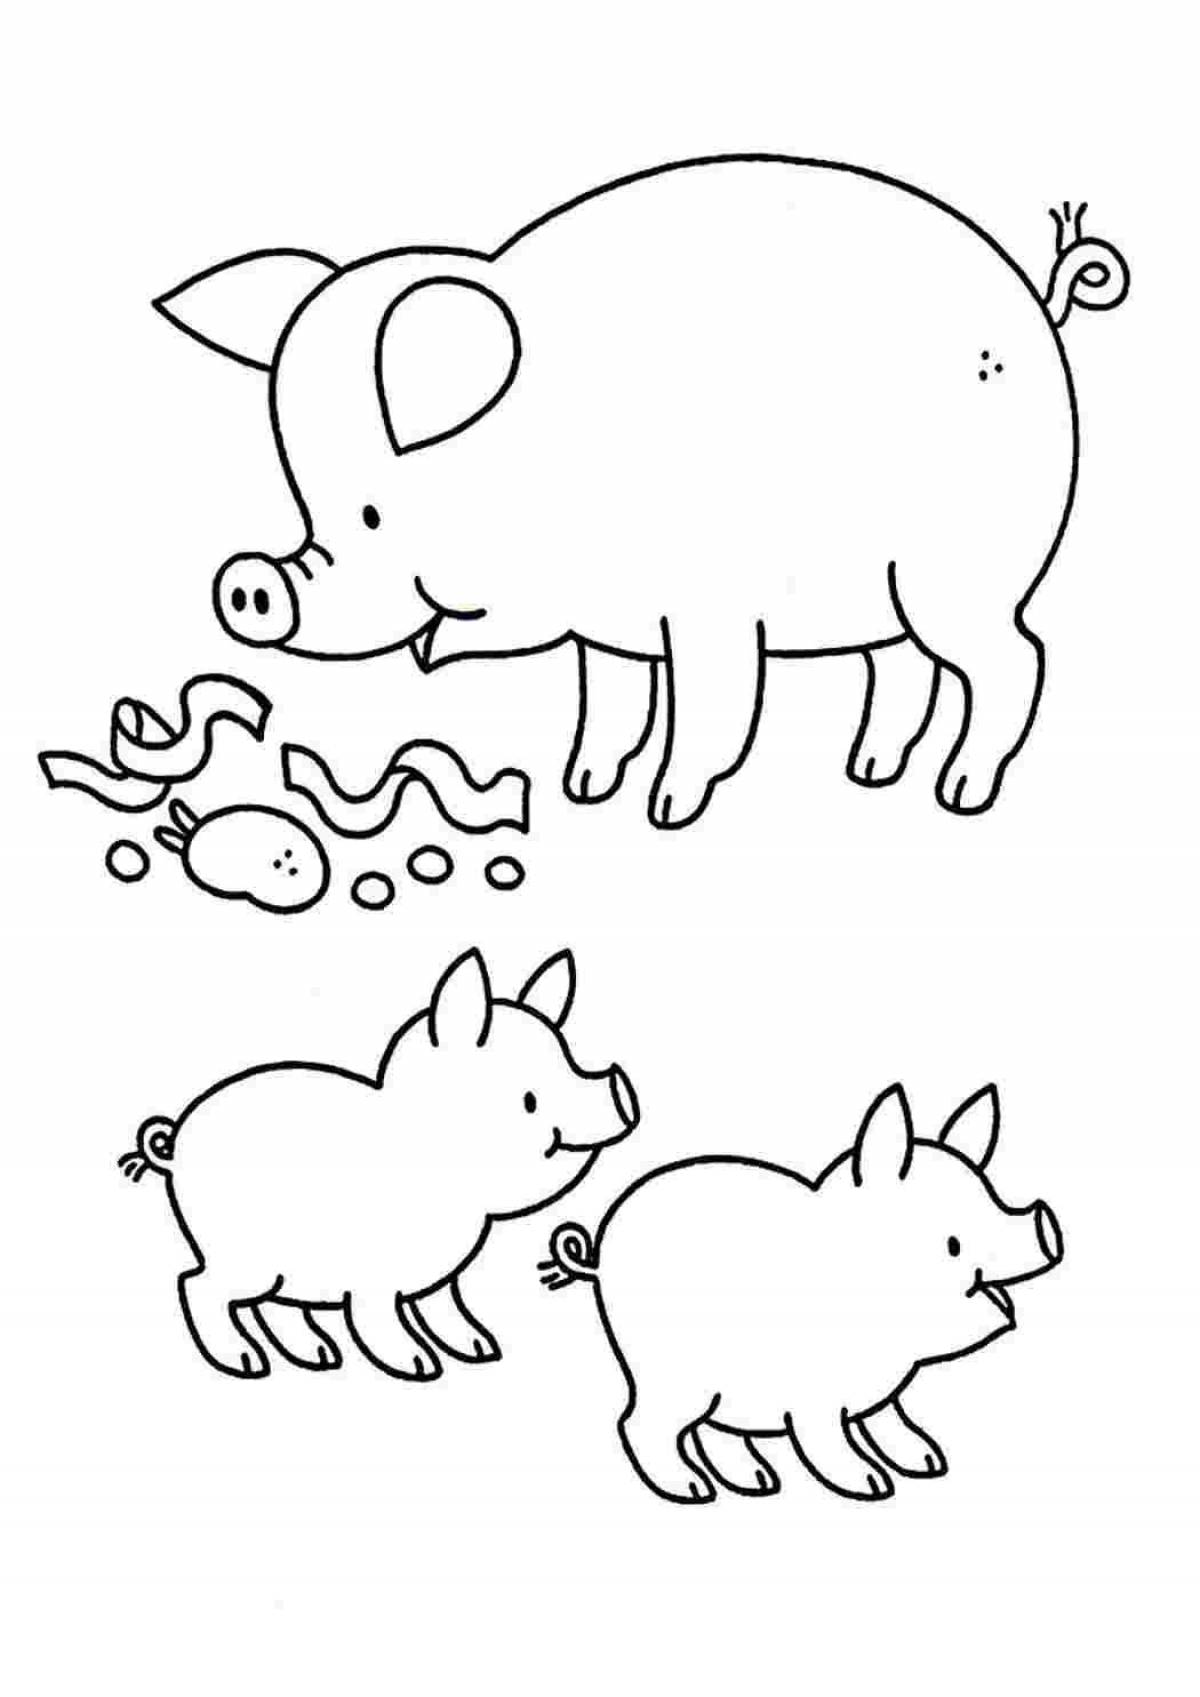 Pets coloring pages for kids 3-4 years old